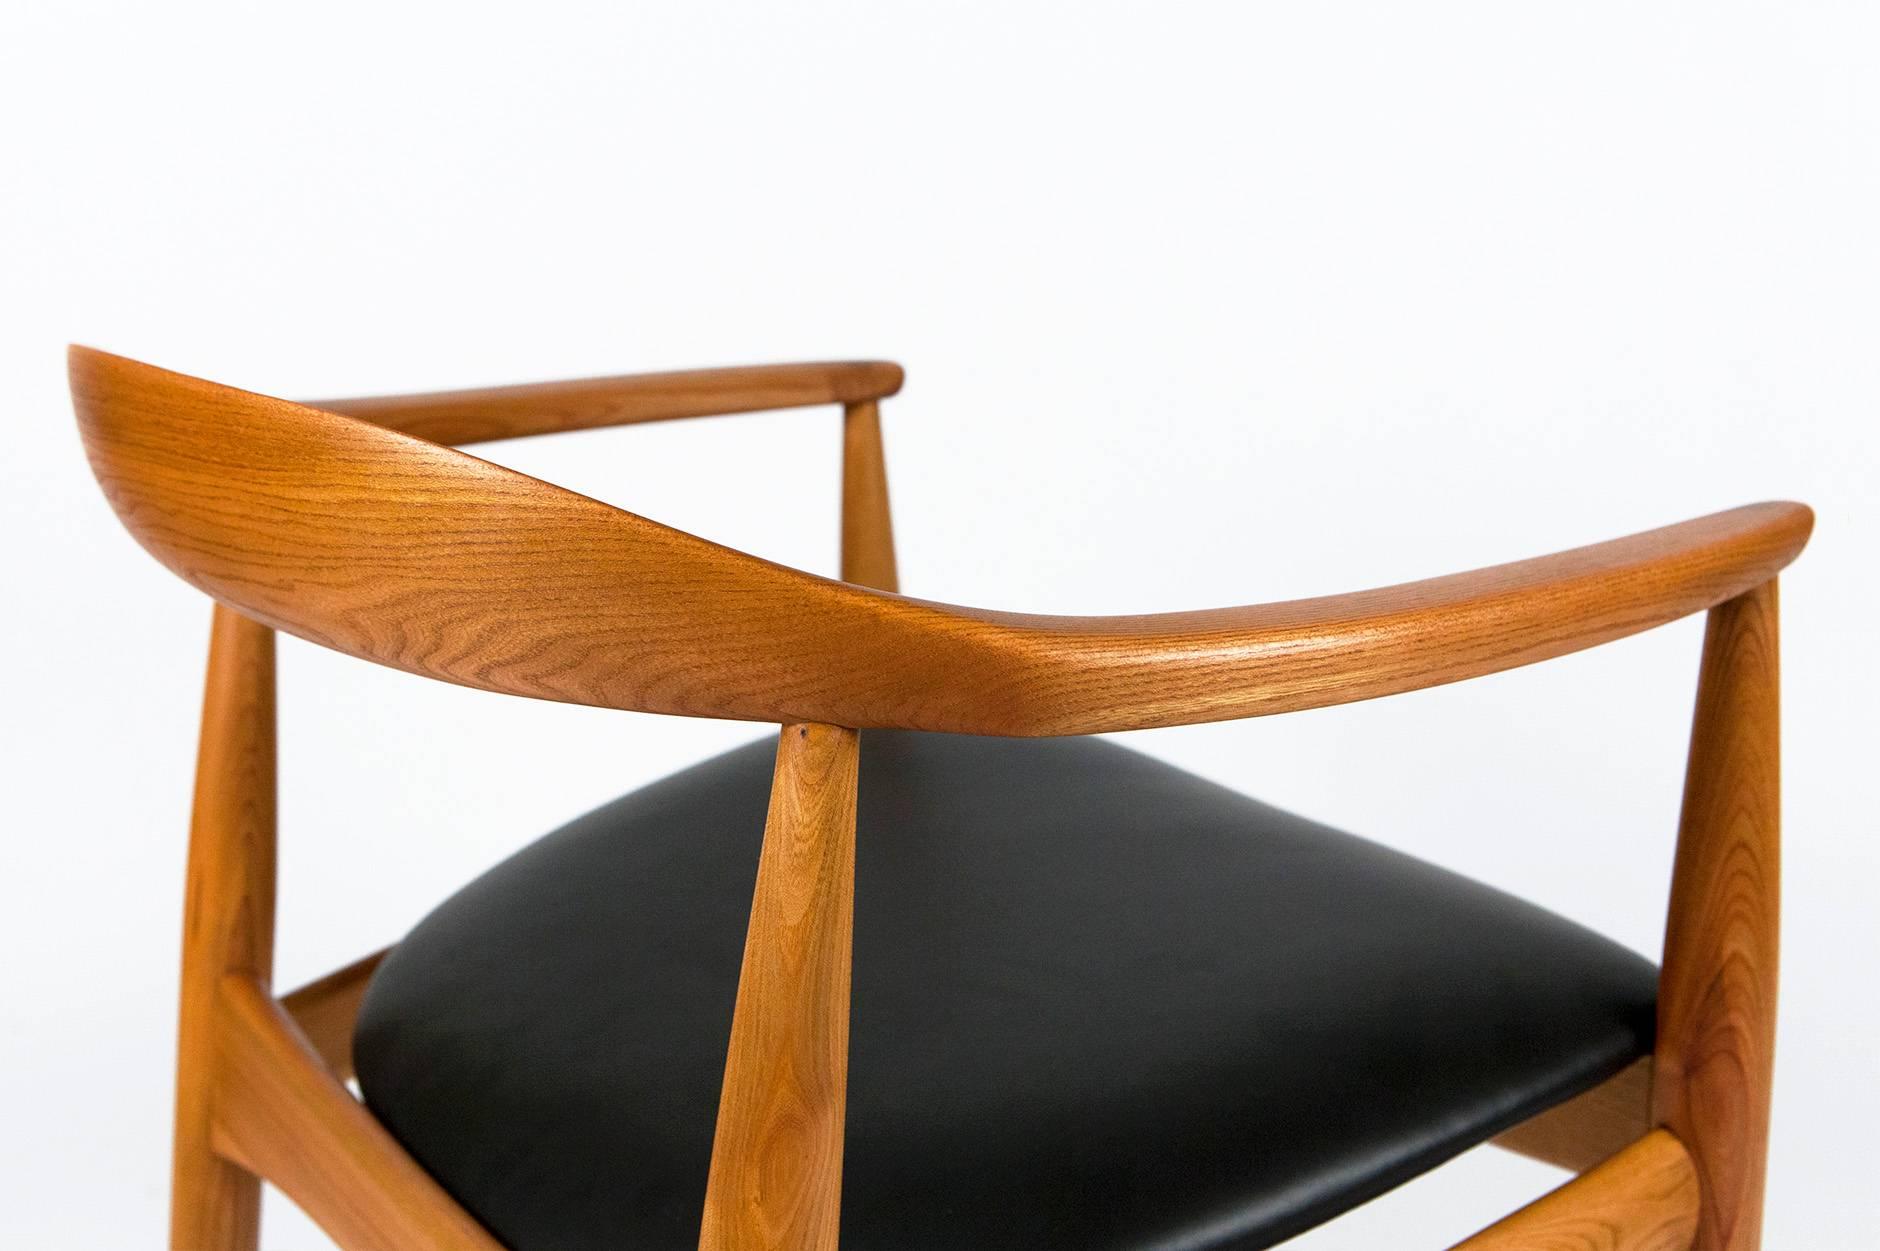 Danish made elmwood round chair produced by Niels Eilersen, circa 1960. Seat reupholstered in new black leather.